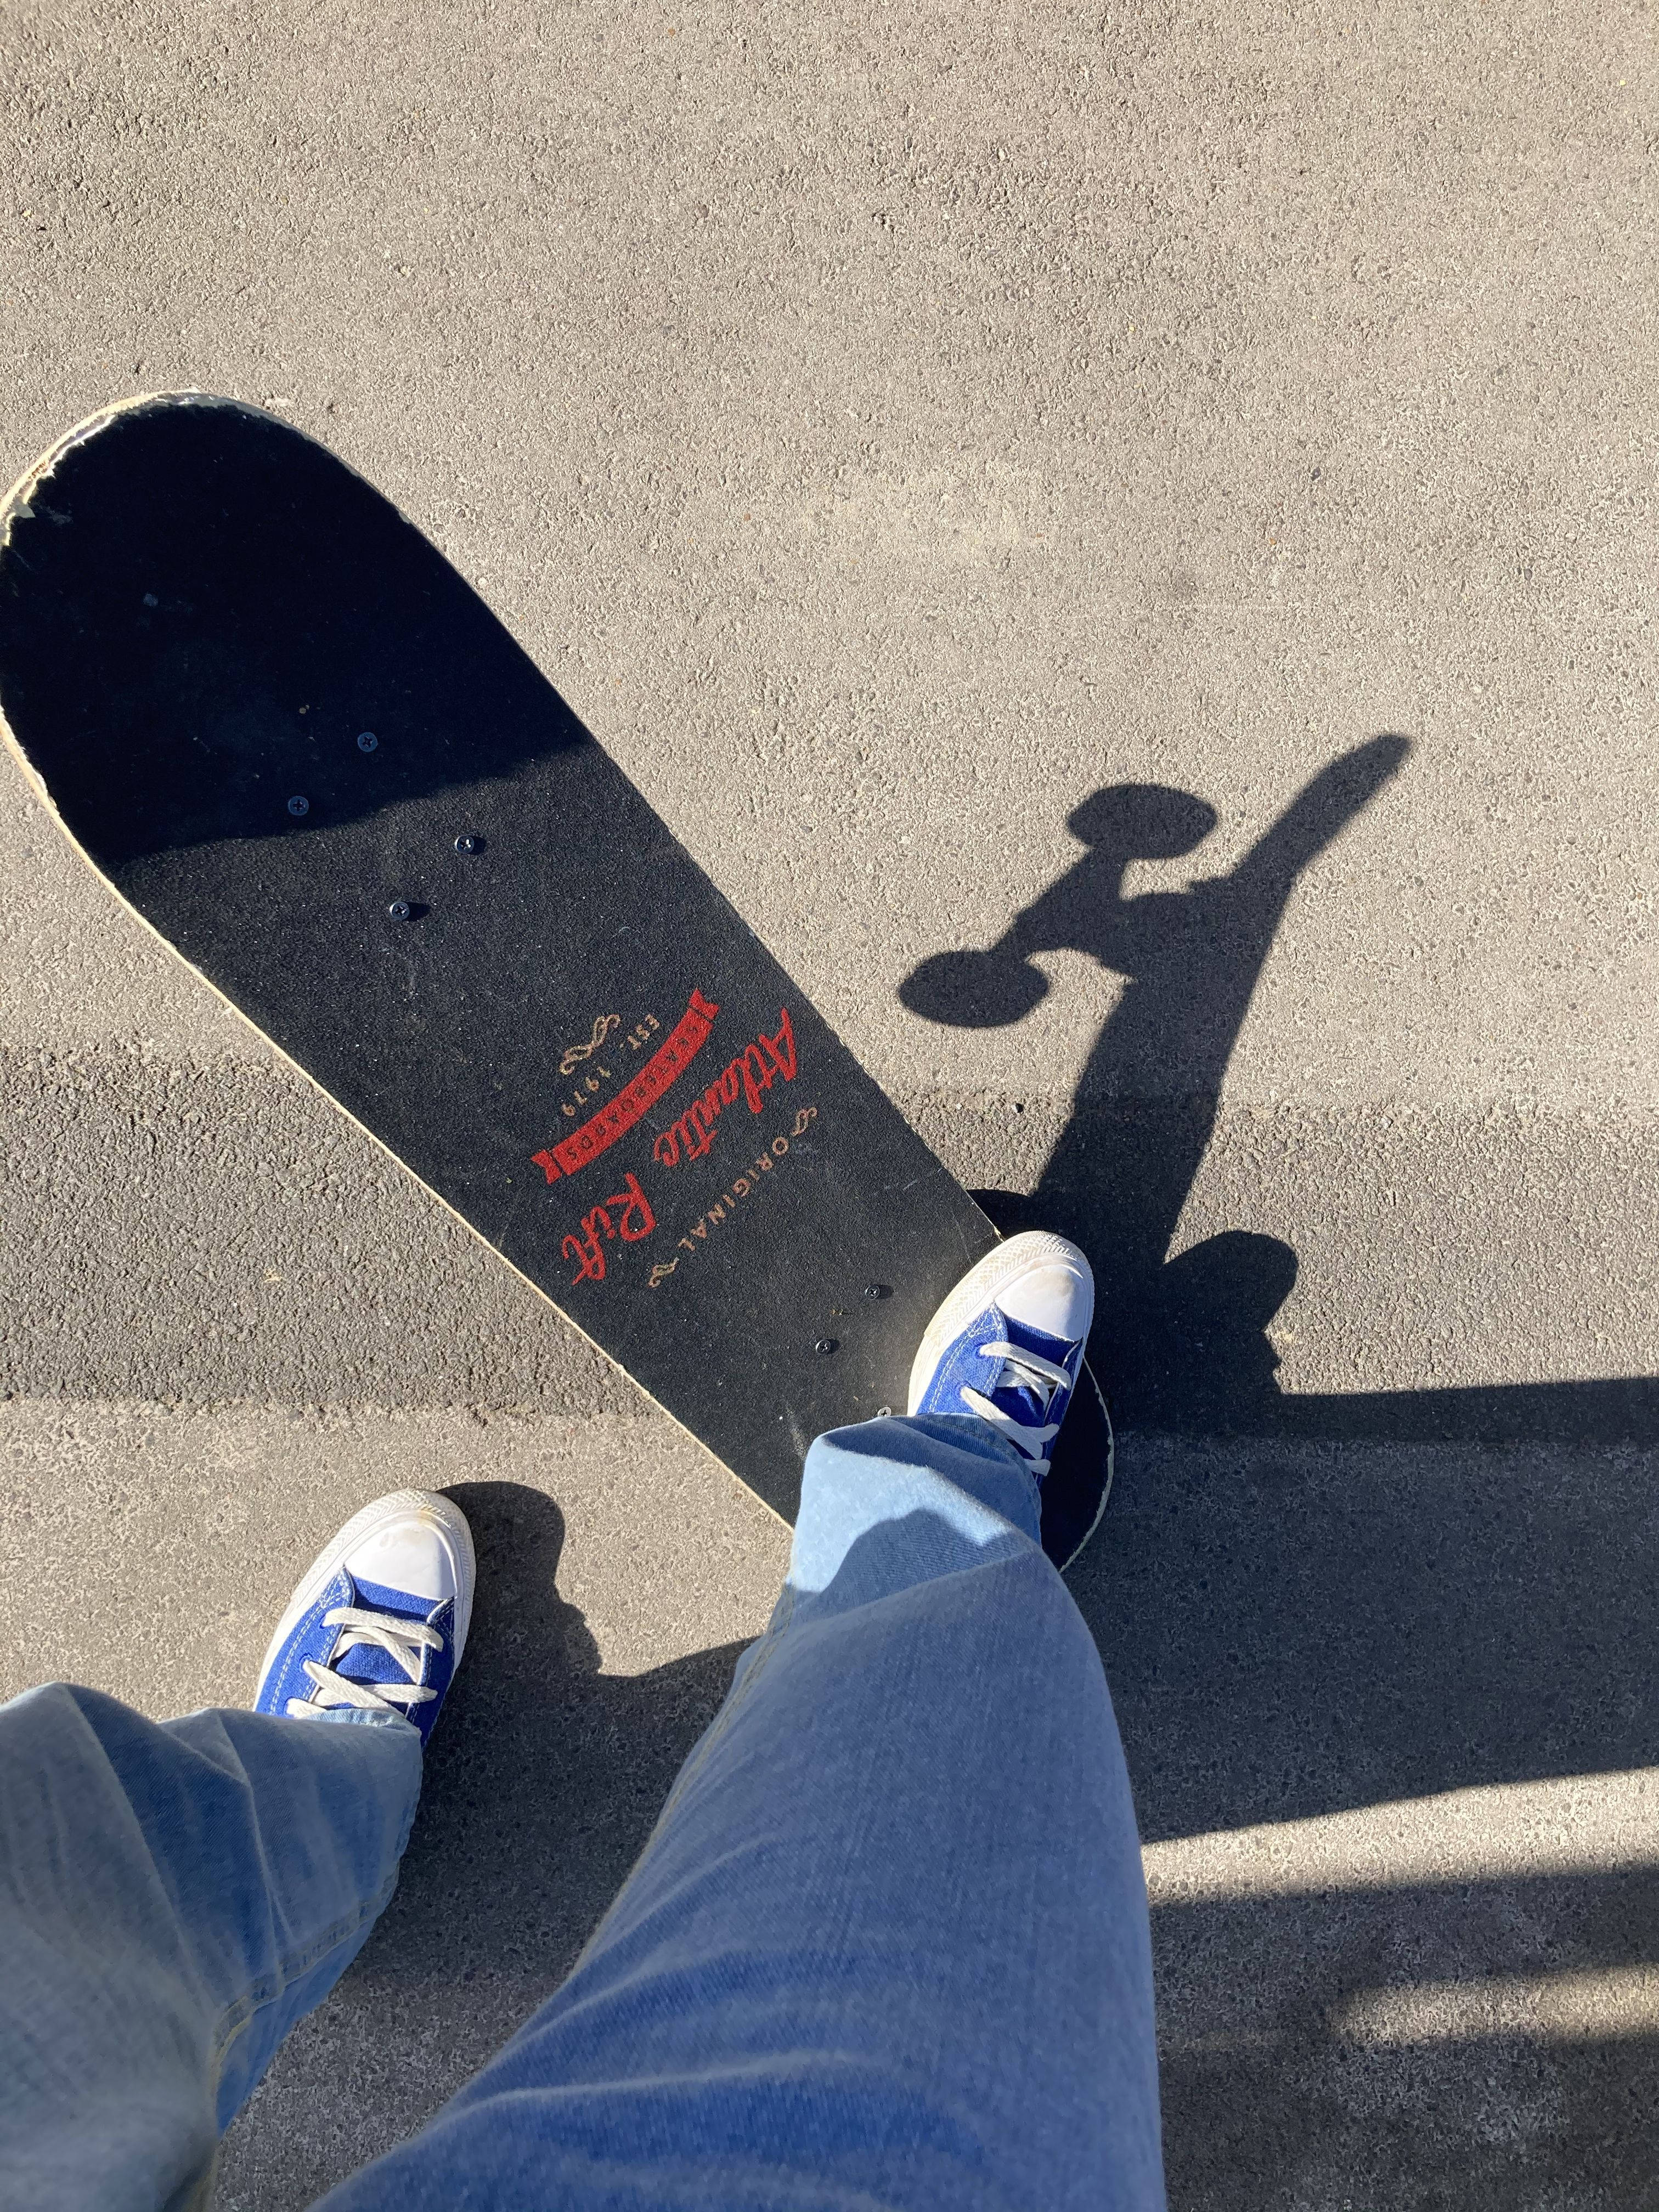 A person wearing blue jeans and blue and white shoes stands in front of a skateboard. - Skate, skater